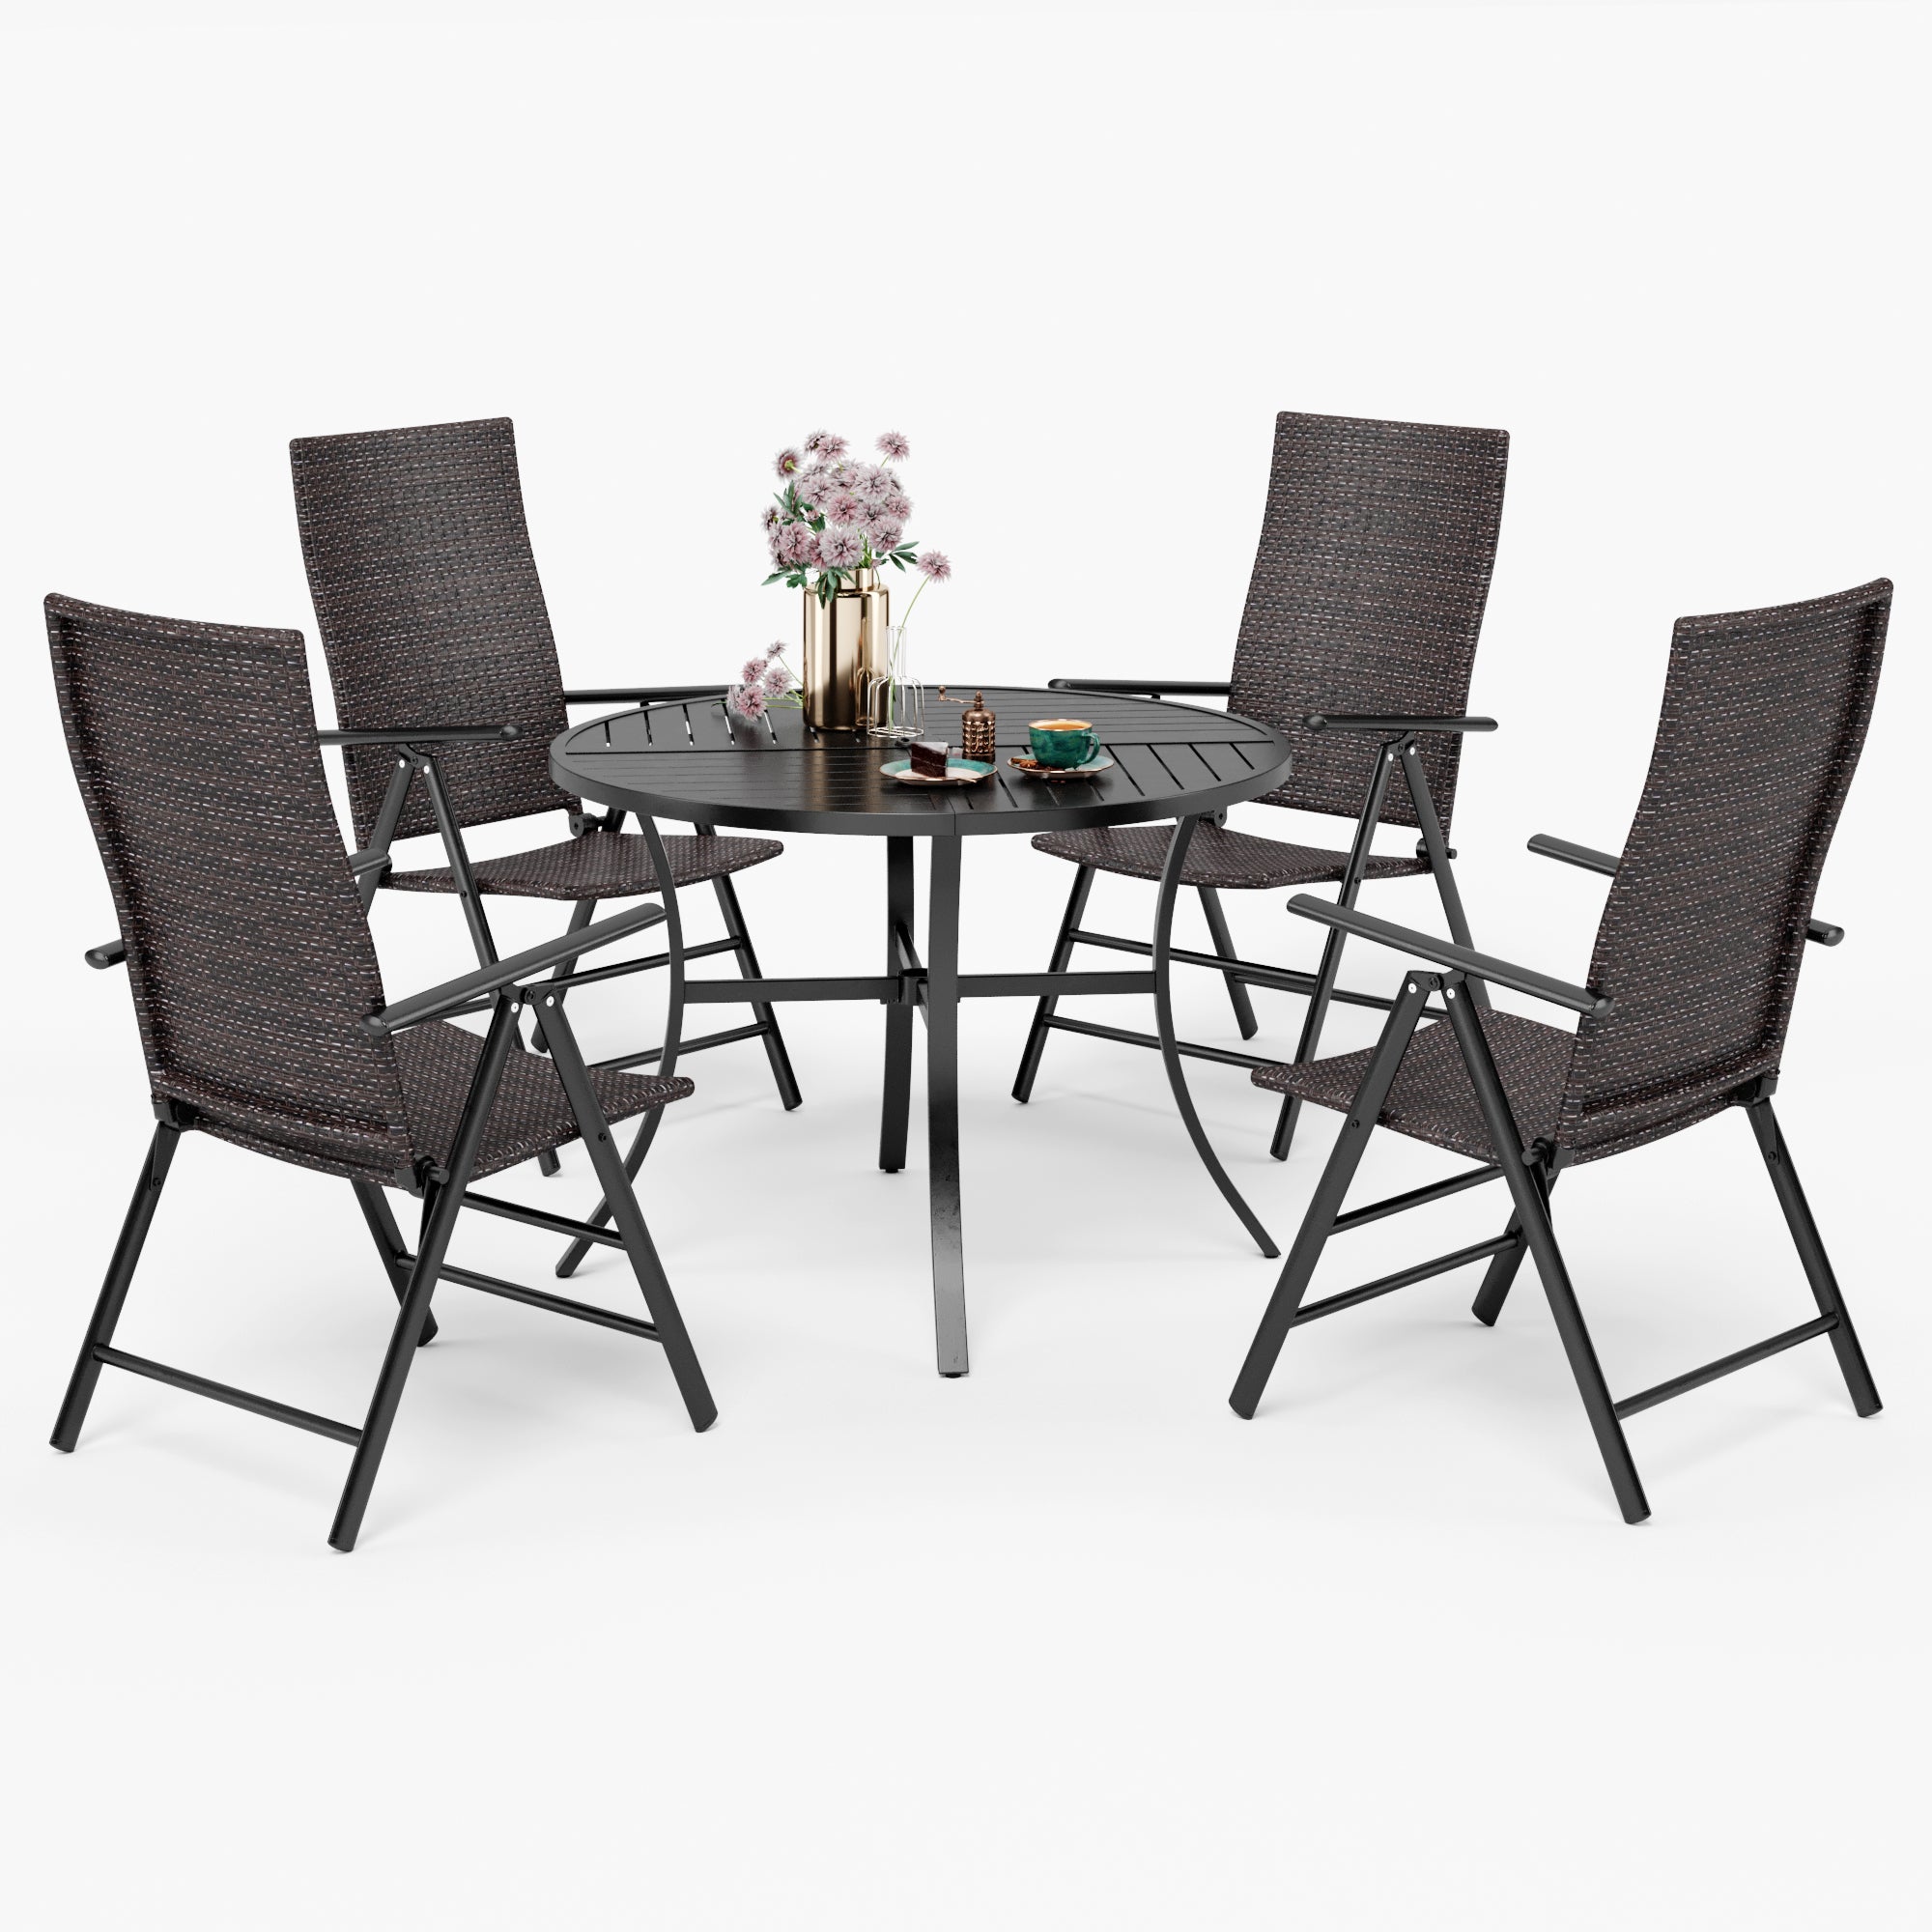 MFSTUDIO 5-Piece Geometrically Stamped Round Table & Rattan Adjustable Reclining Foldable Chairs Outdoor Dining Set